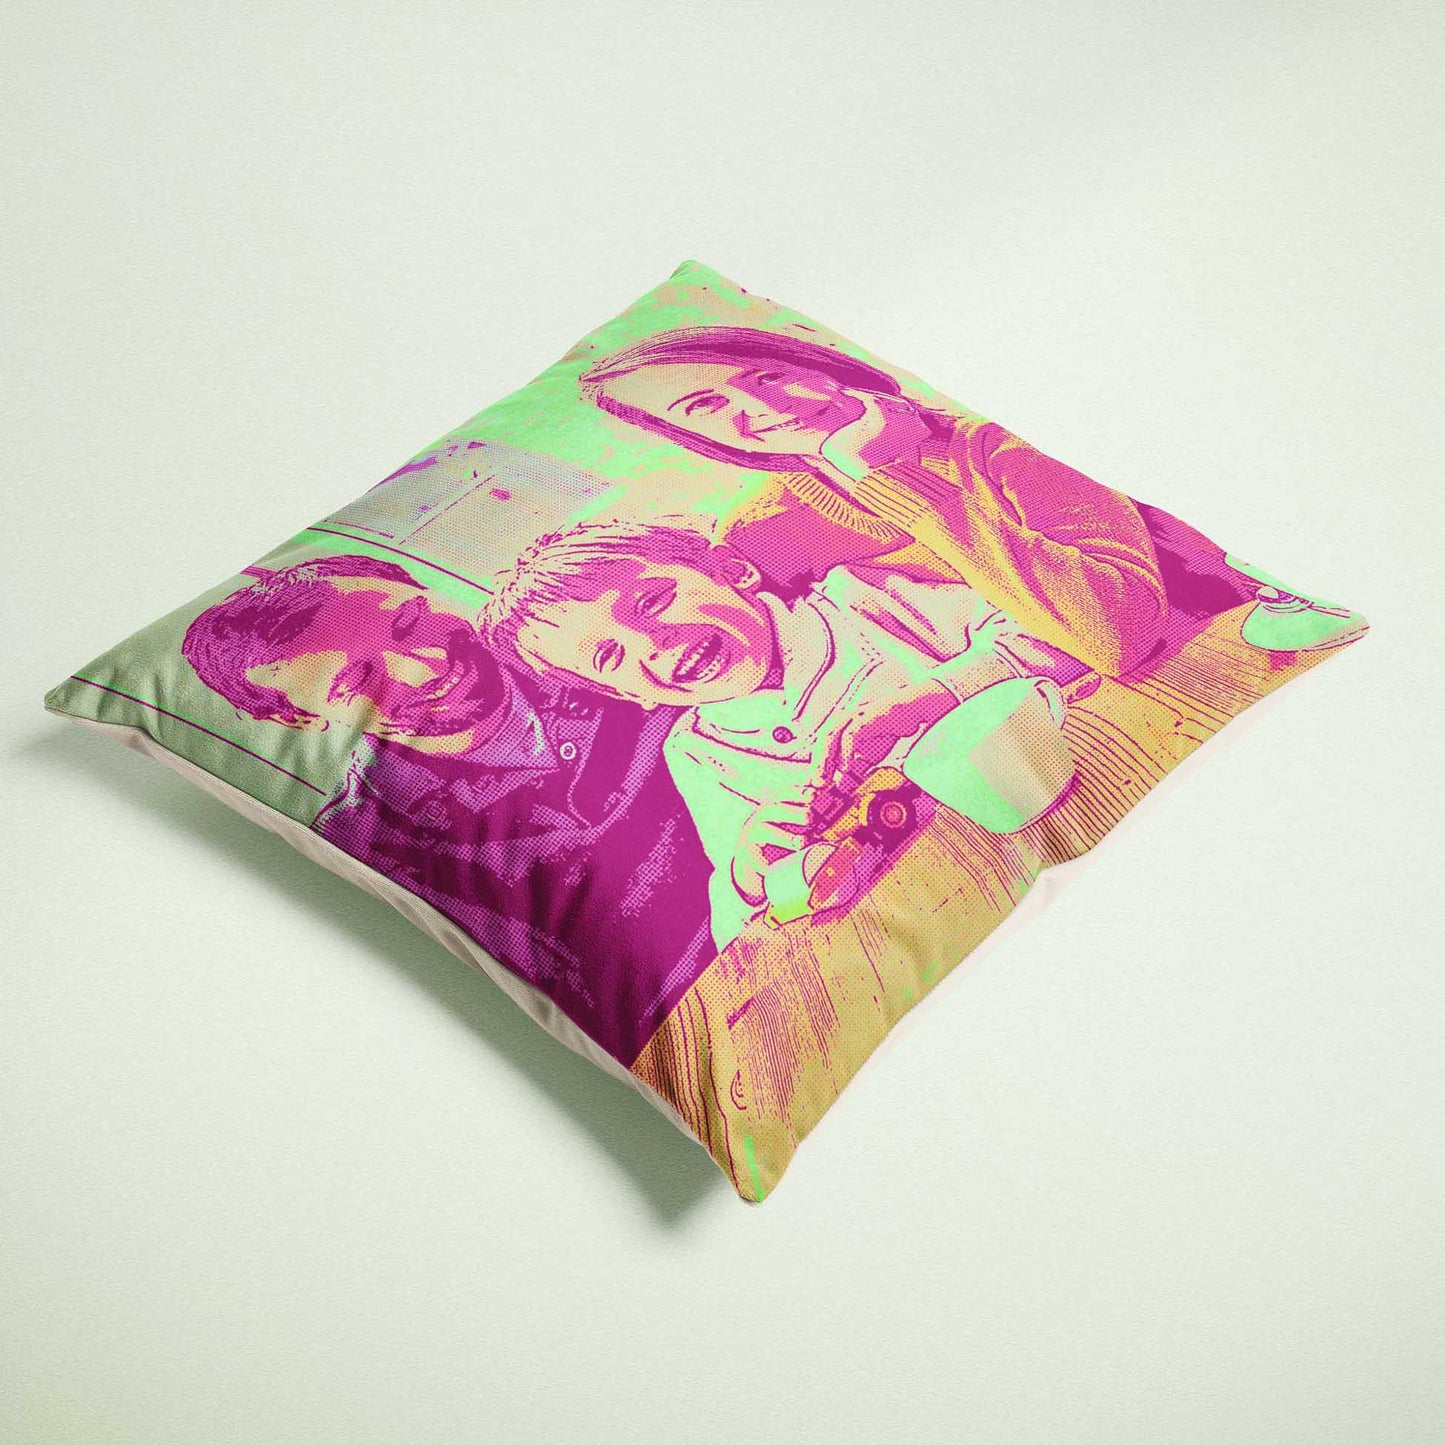 Bring a burst of fun and vibrancy to your home decor with a personalised Pink & Green Pop Art Cushion. Crafted from soft velvet fabric, this colourful and full cushion offers a cosy and inviting feel. Print it from a photo 